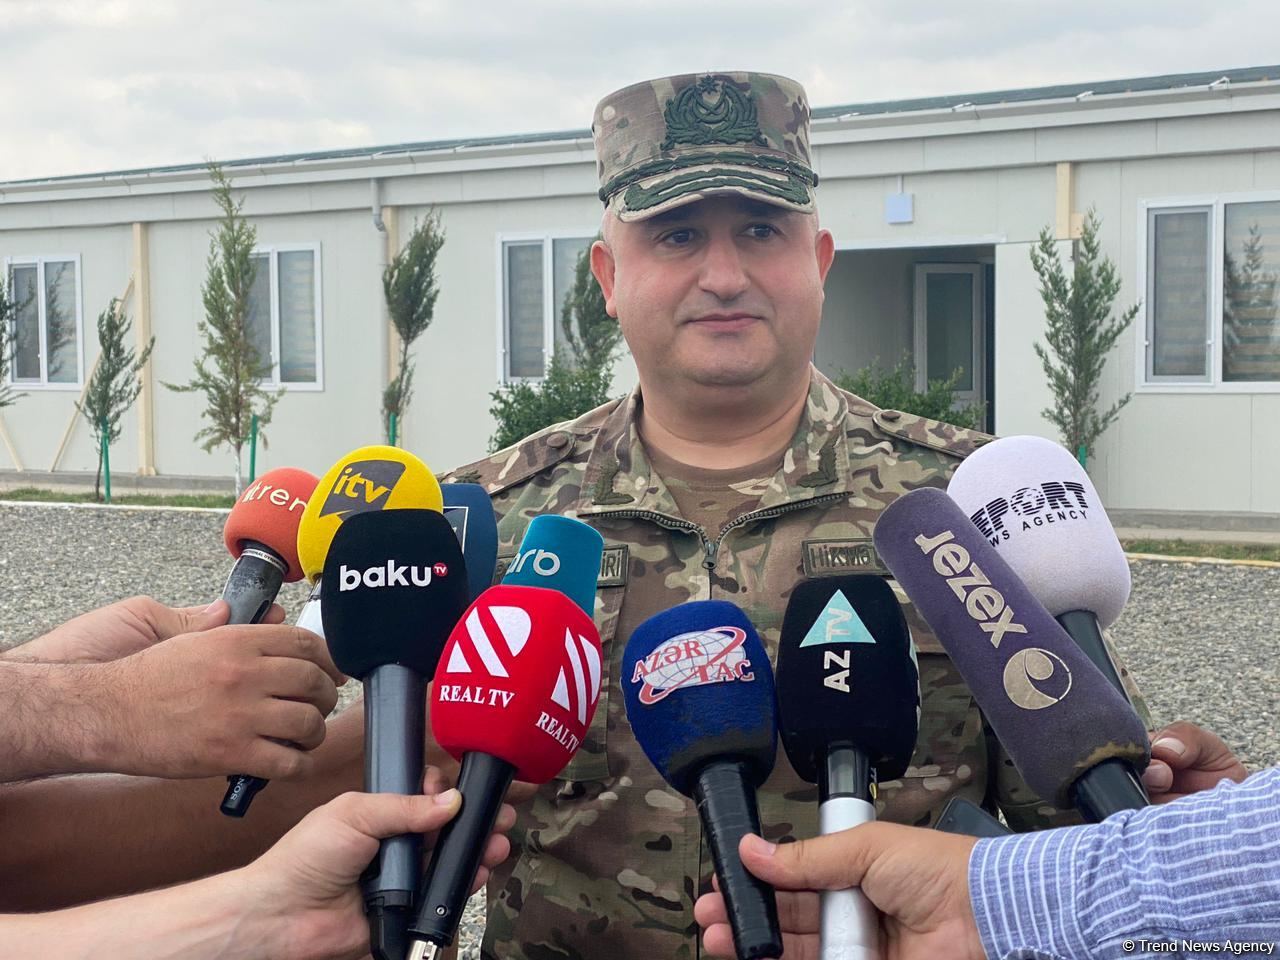 Construction of military units to continue in Azerbaijani liberated lands - Major General (VIDEO)